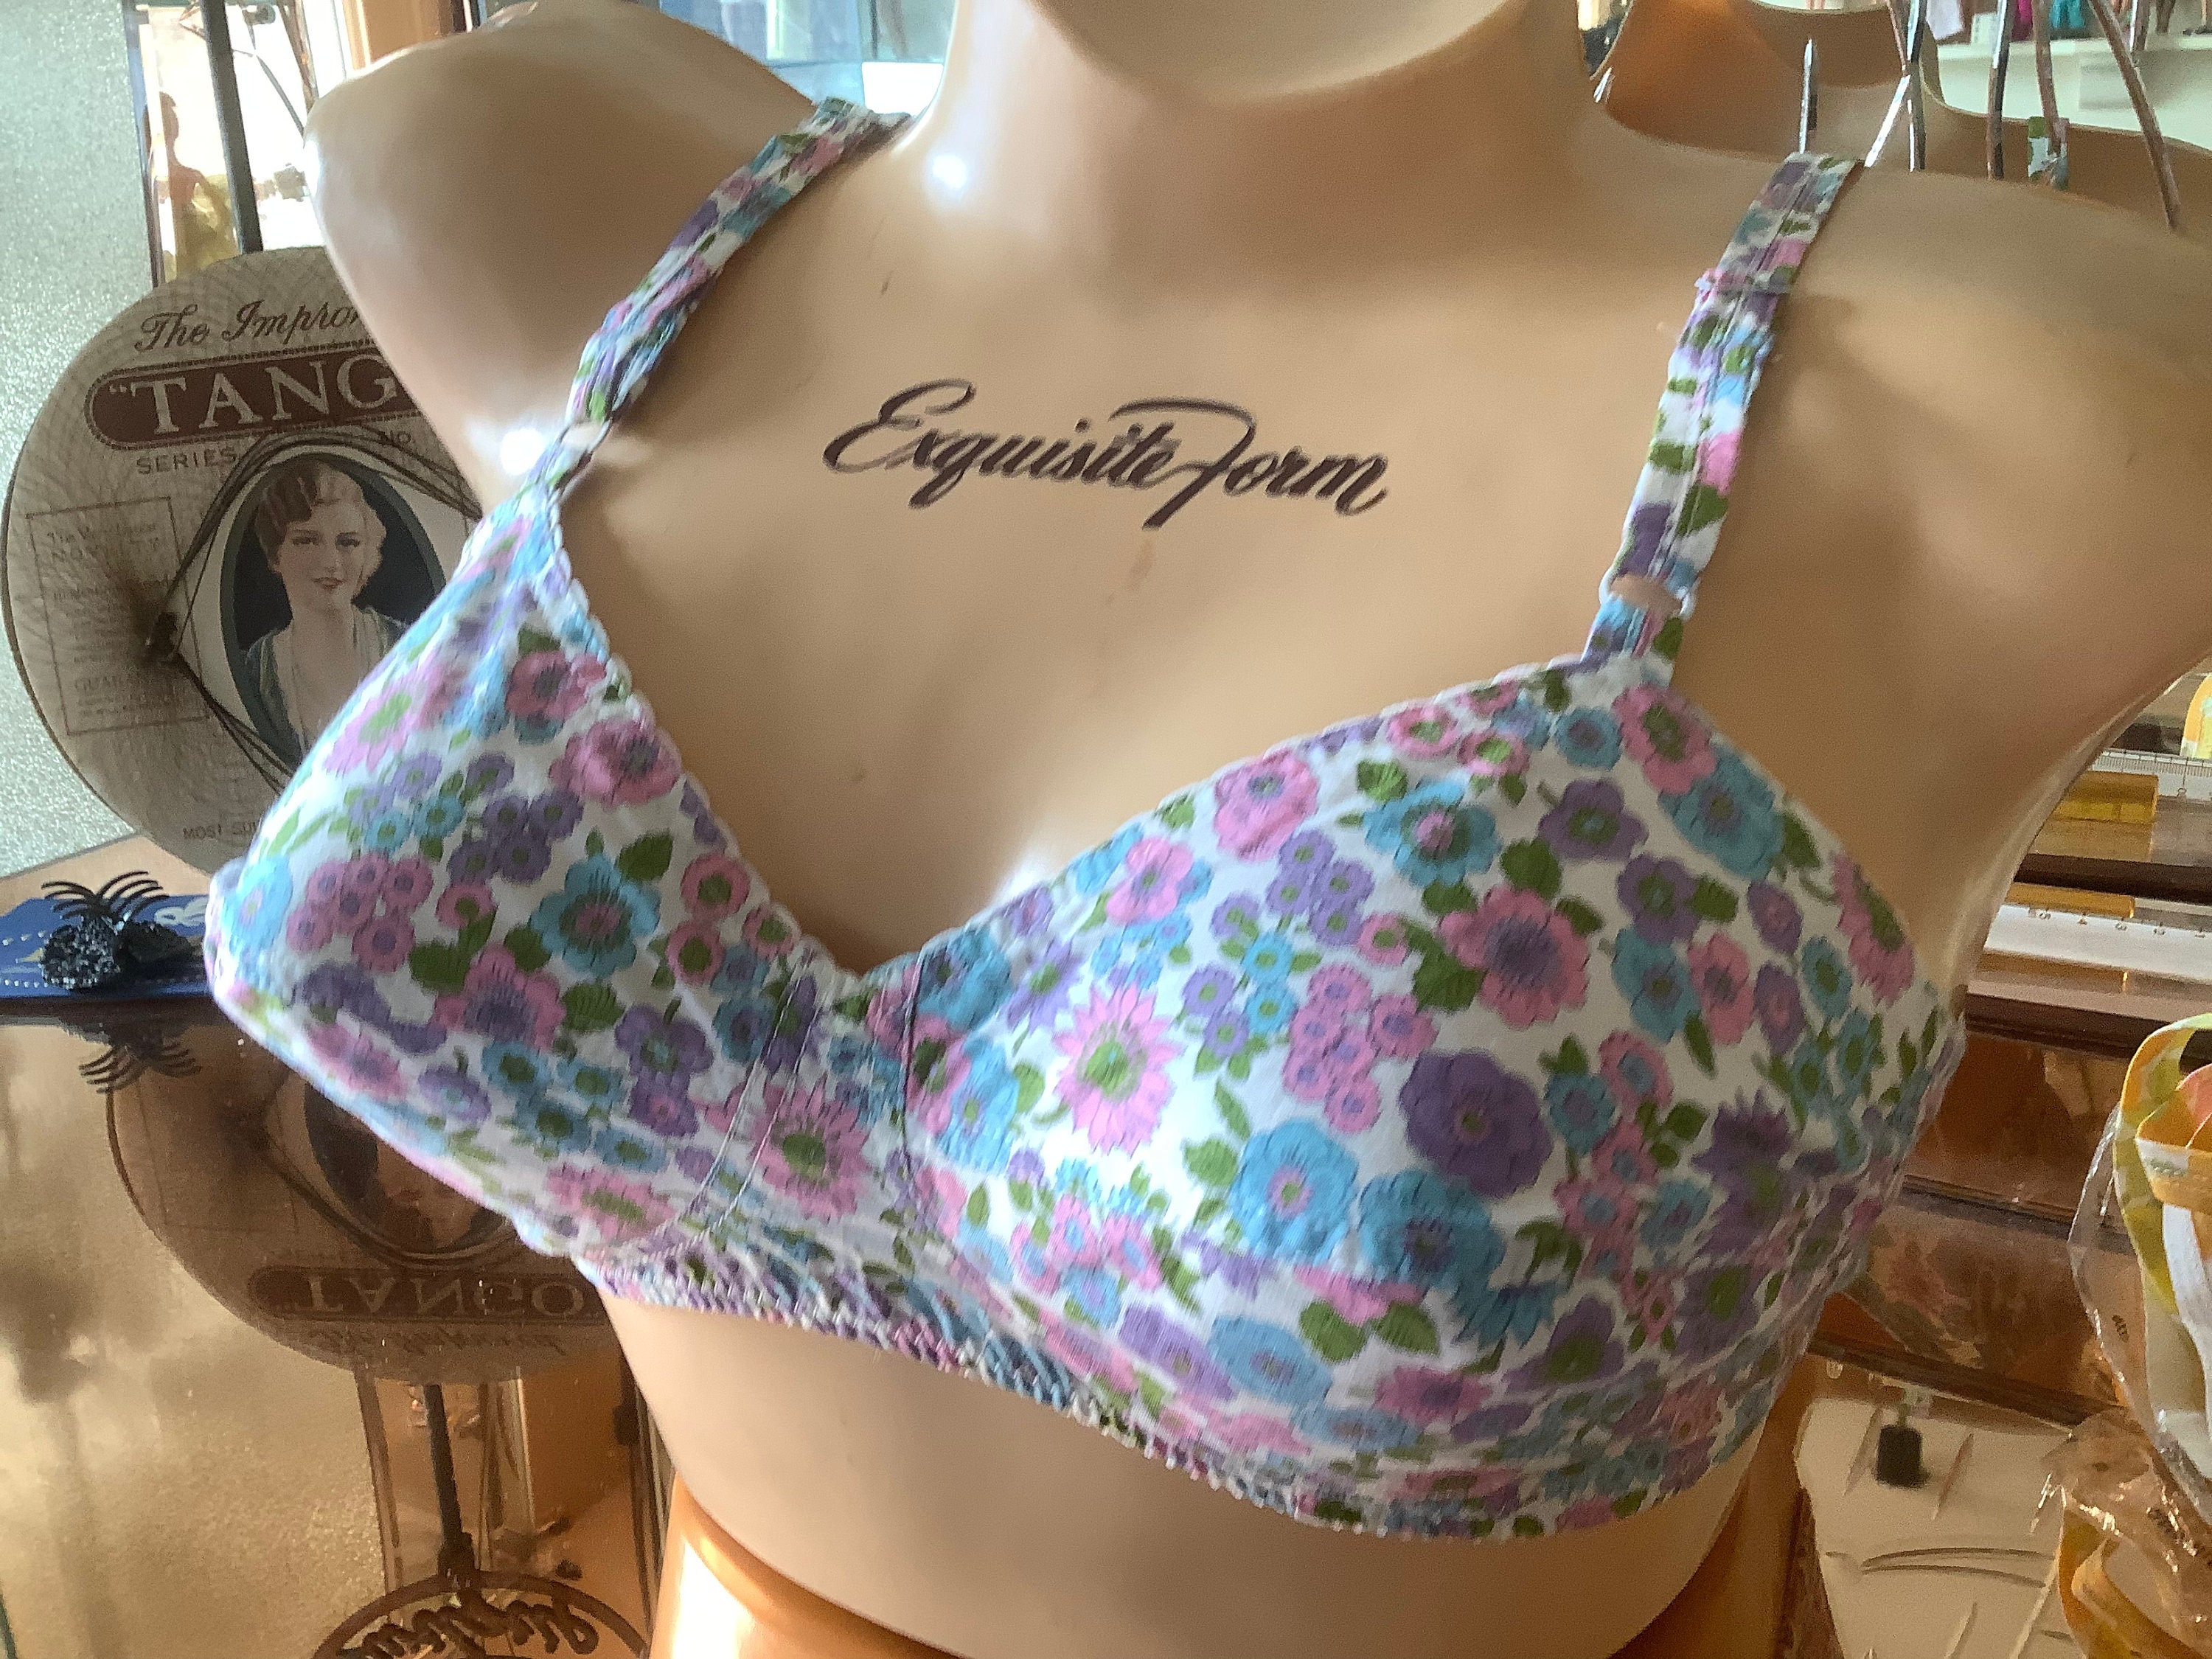 Floral Printed Powernet Bra By St. Michael